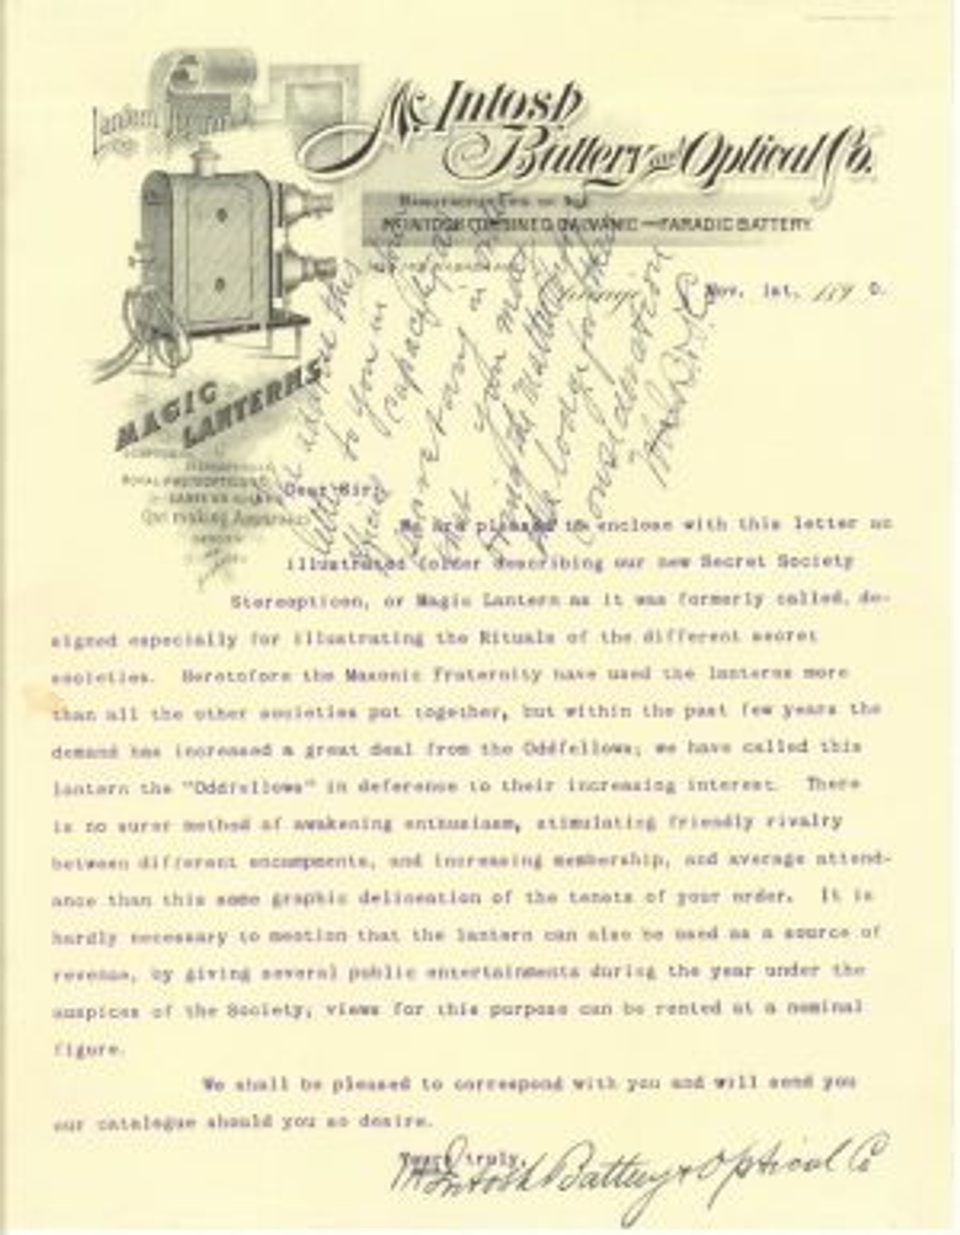 Letter from the McIntosh Battery and Optical Co.